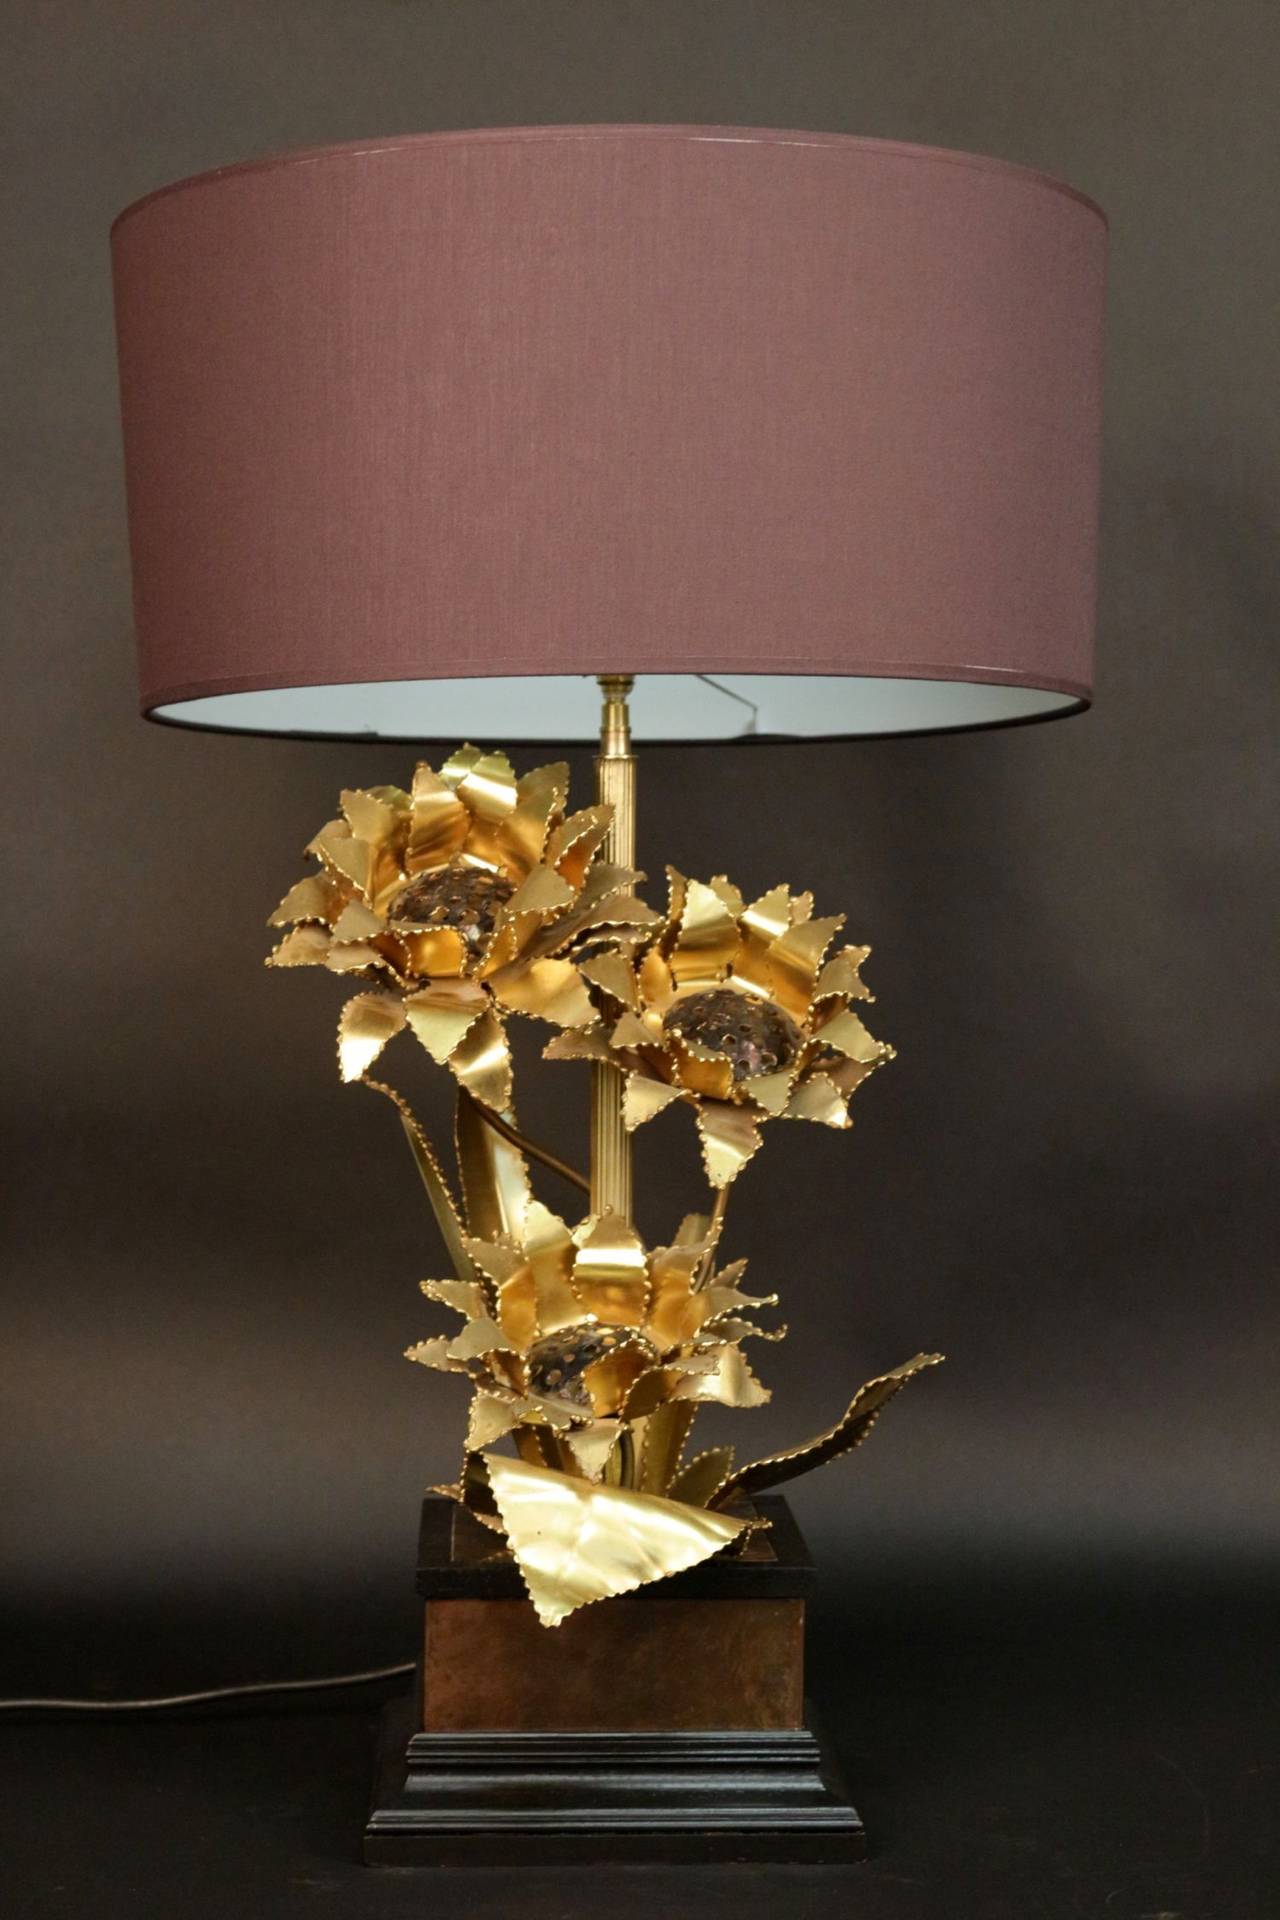 1960s 'Sunflower' brass table lamp by Maison FlorArt. Three brass sunflowers. Flower center in blackened brass and stylized flowers. Black lacquered wooden base and 'eglomise' brass. One lighted arm.